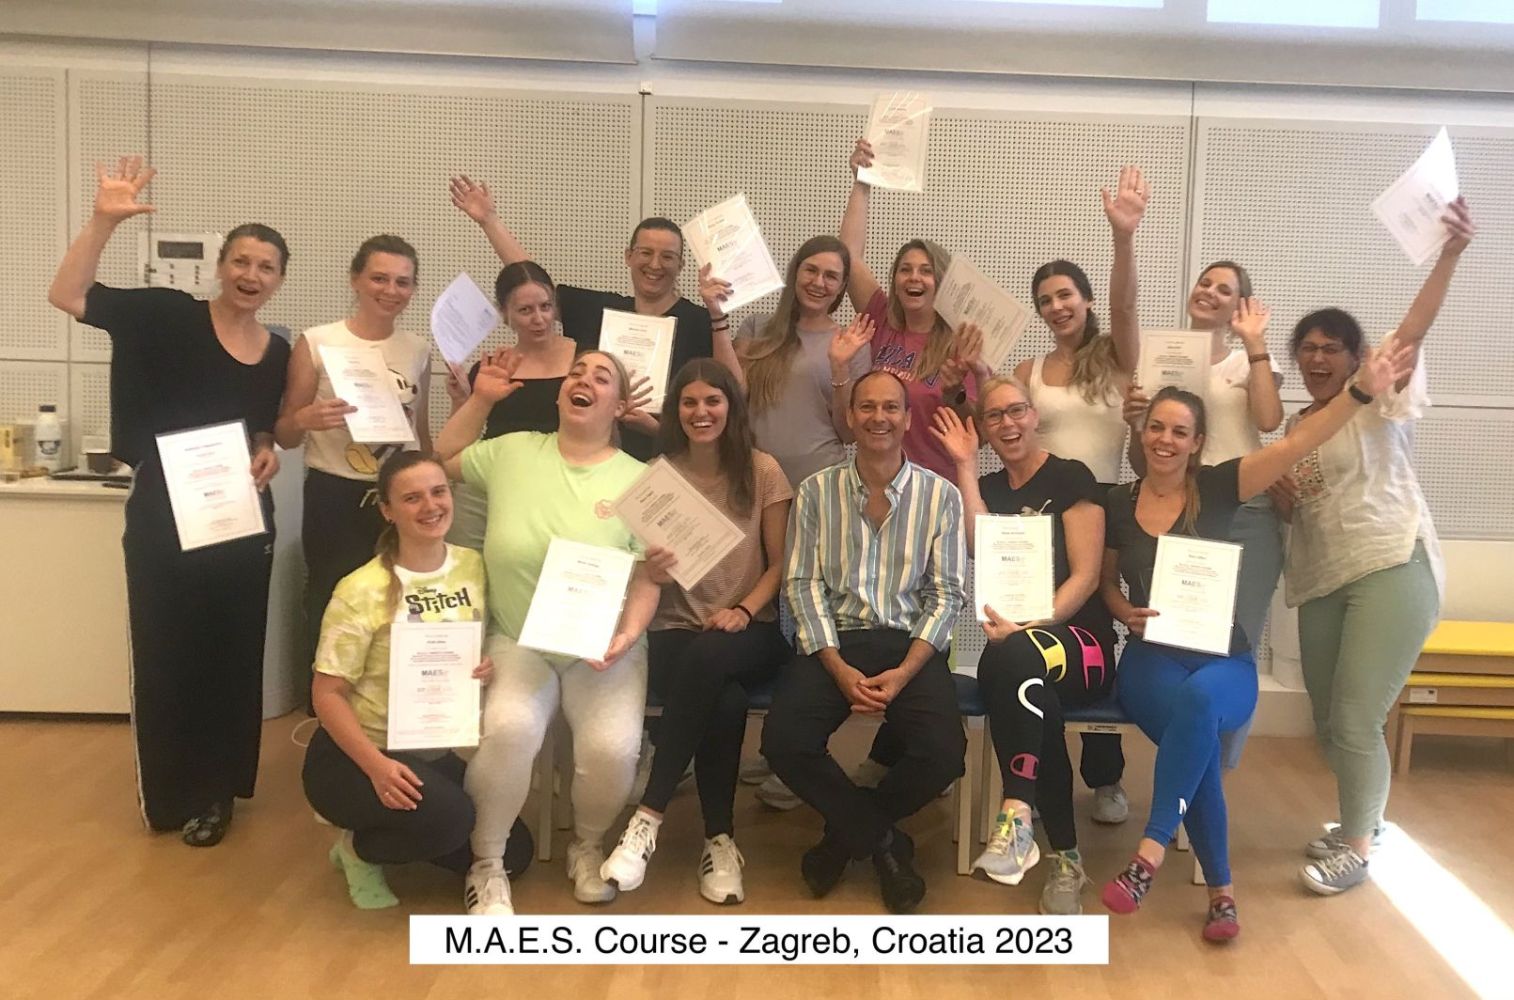 MAES Therapy – Highly specialised courses in Croatia for paediatric therapists wanting to improve treatment of children with Cerebral Palsy.